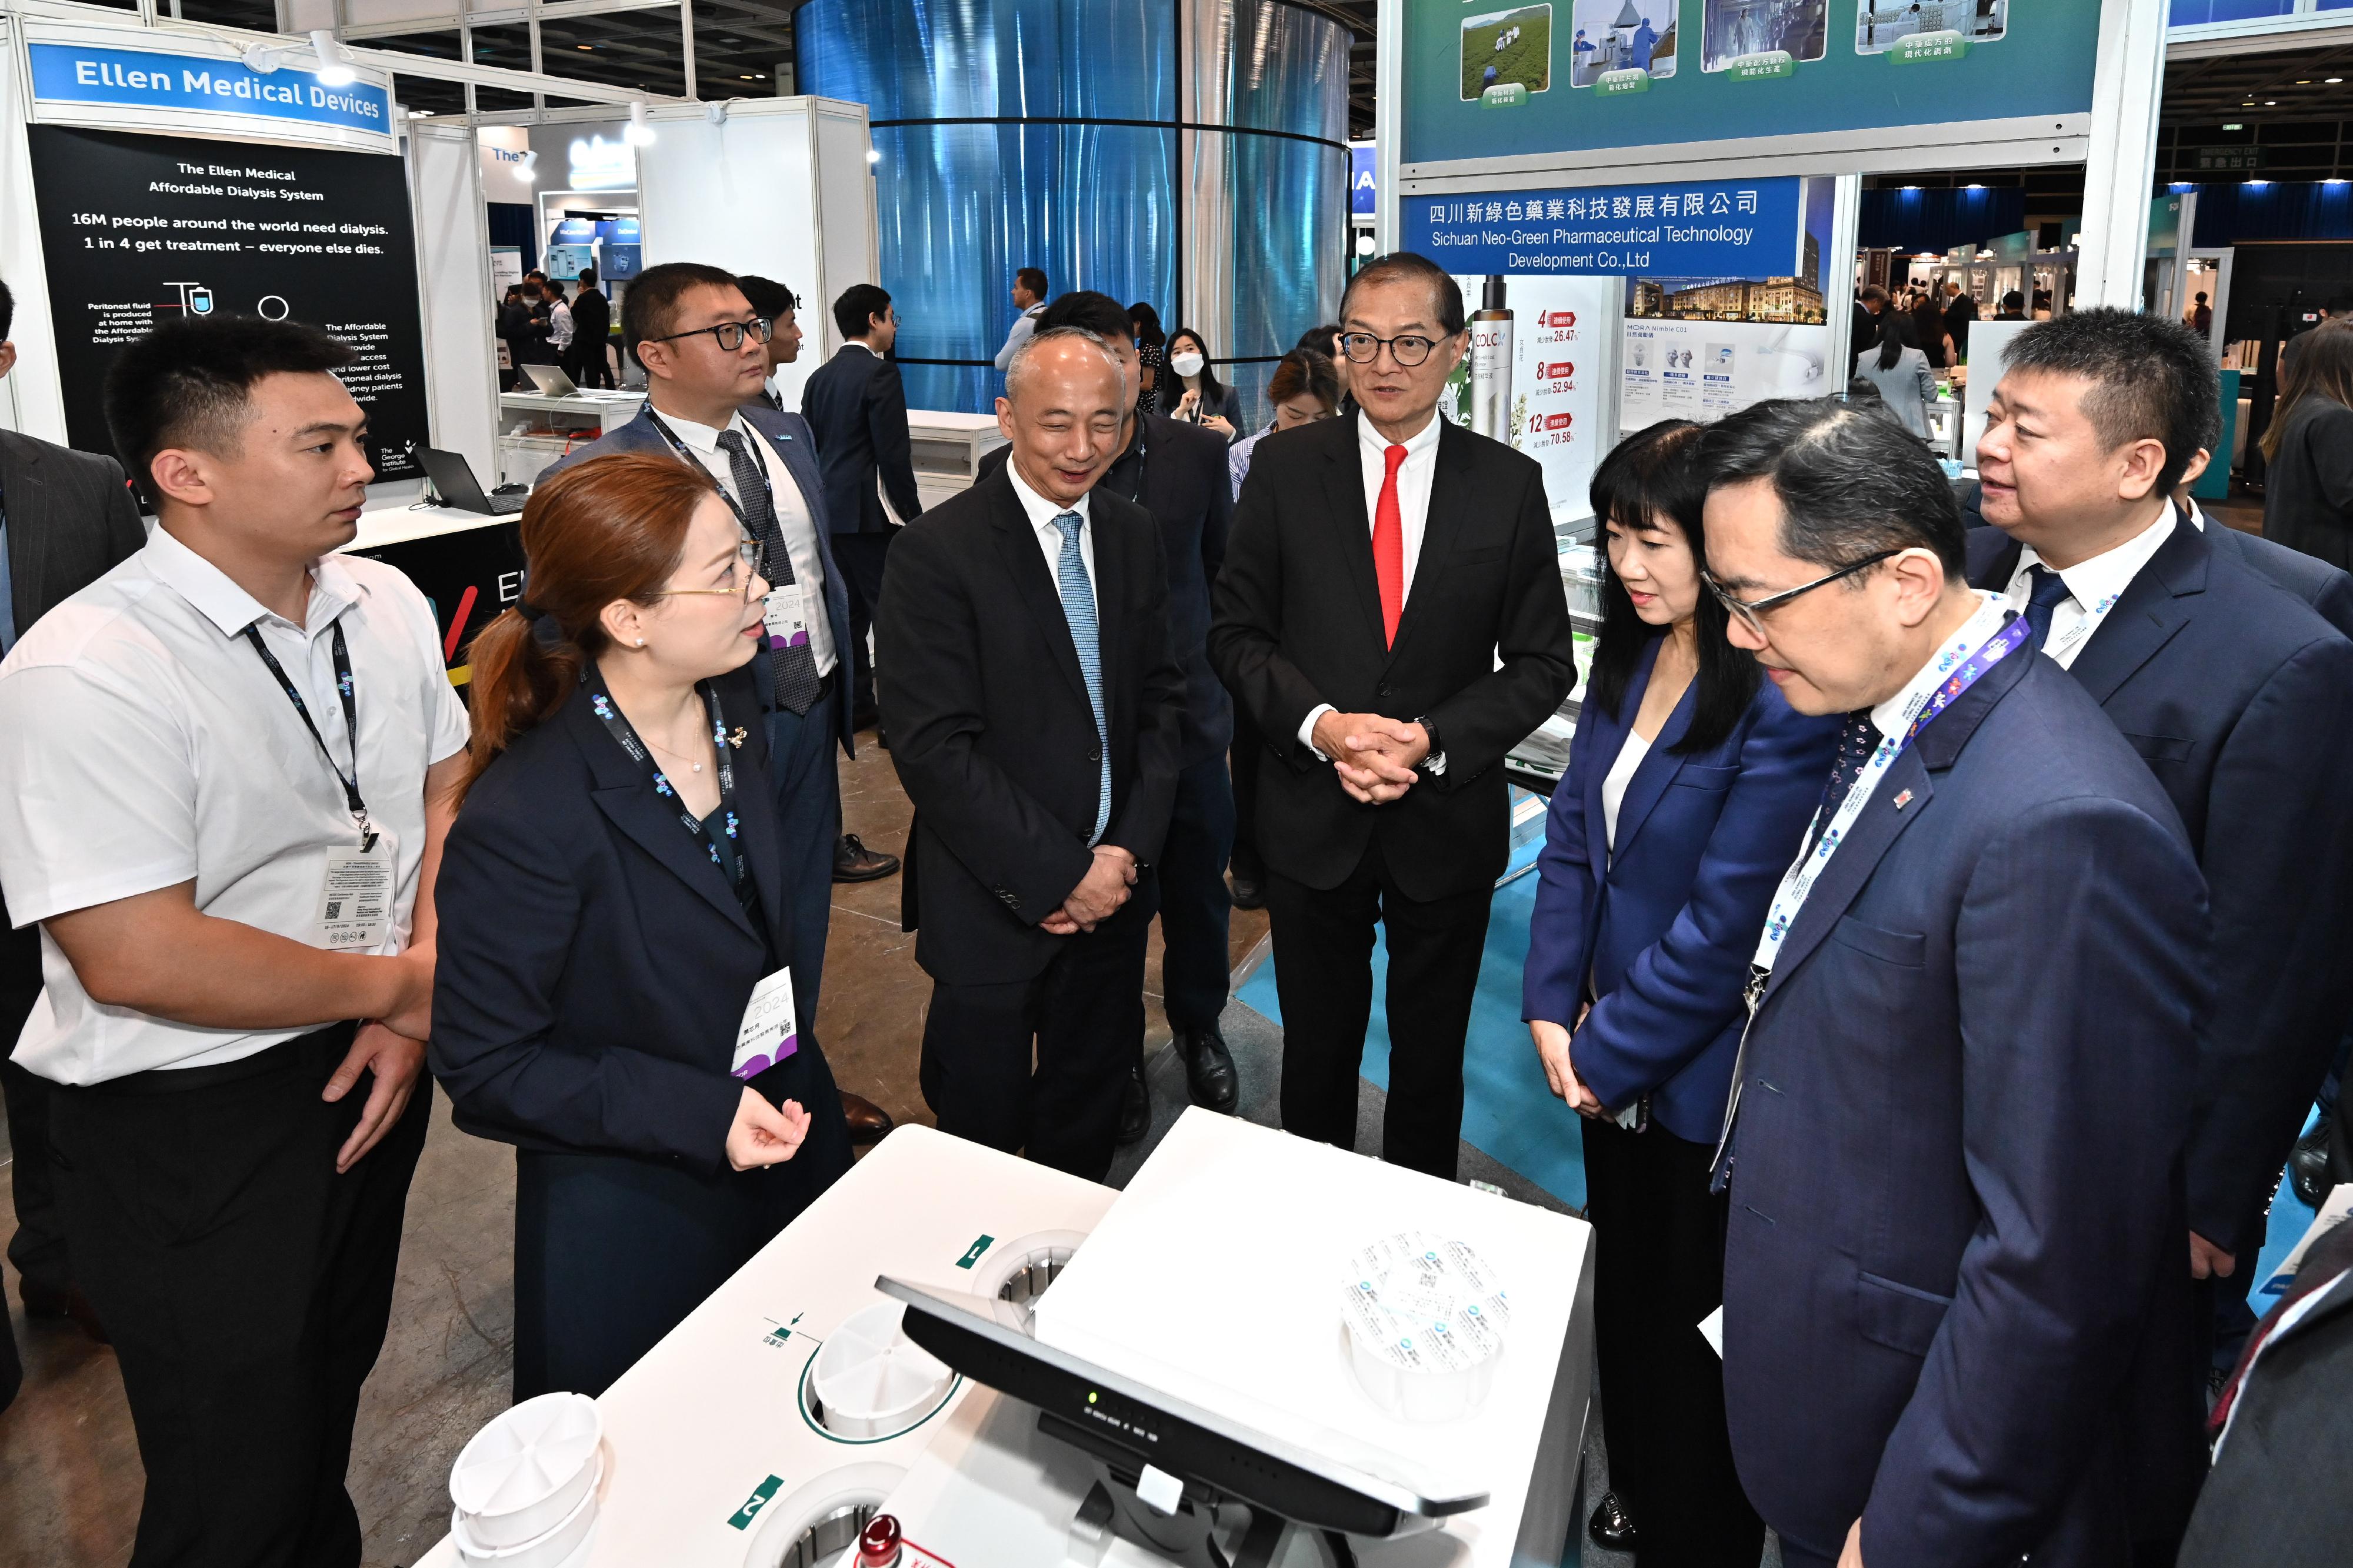 The Secretary for Health, Professor Lo Chung-mau (fourth right), accompanied by the Director of the Sichuan Provincial Administration of Traditional Chinese Medicine, Mr Tian Xingjun (fifth right), tours the booth set up by the Sichuan Provincial Administration of Traditional Chinese Medicine at the Asia Summit on Global Health today (May 16).